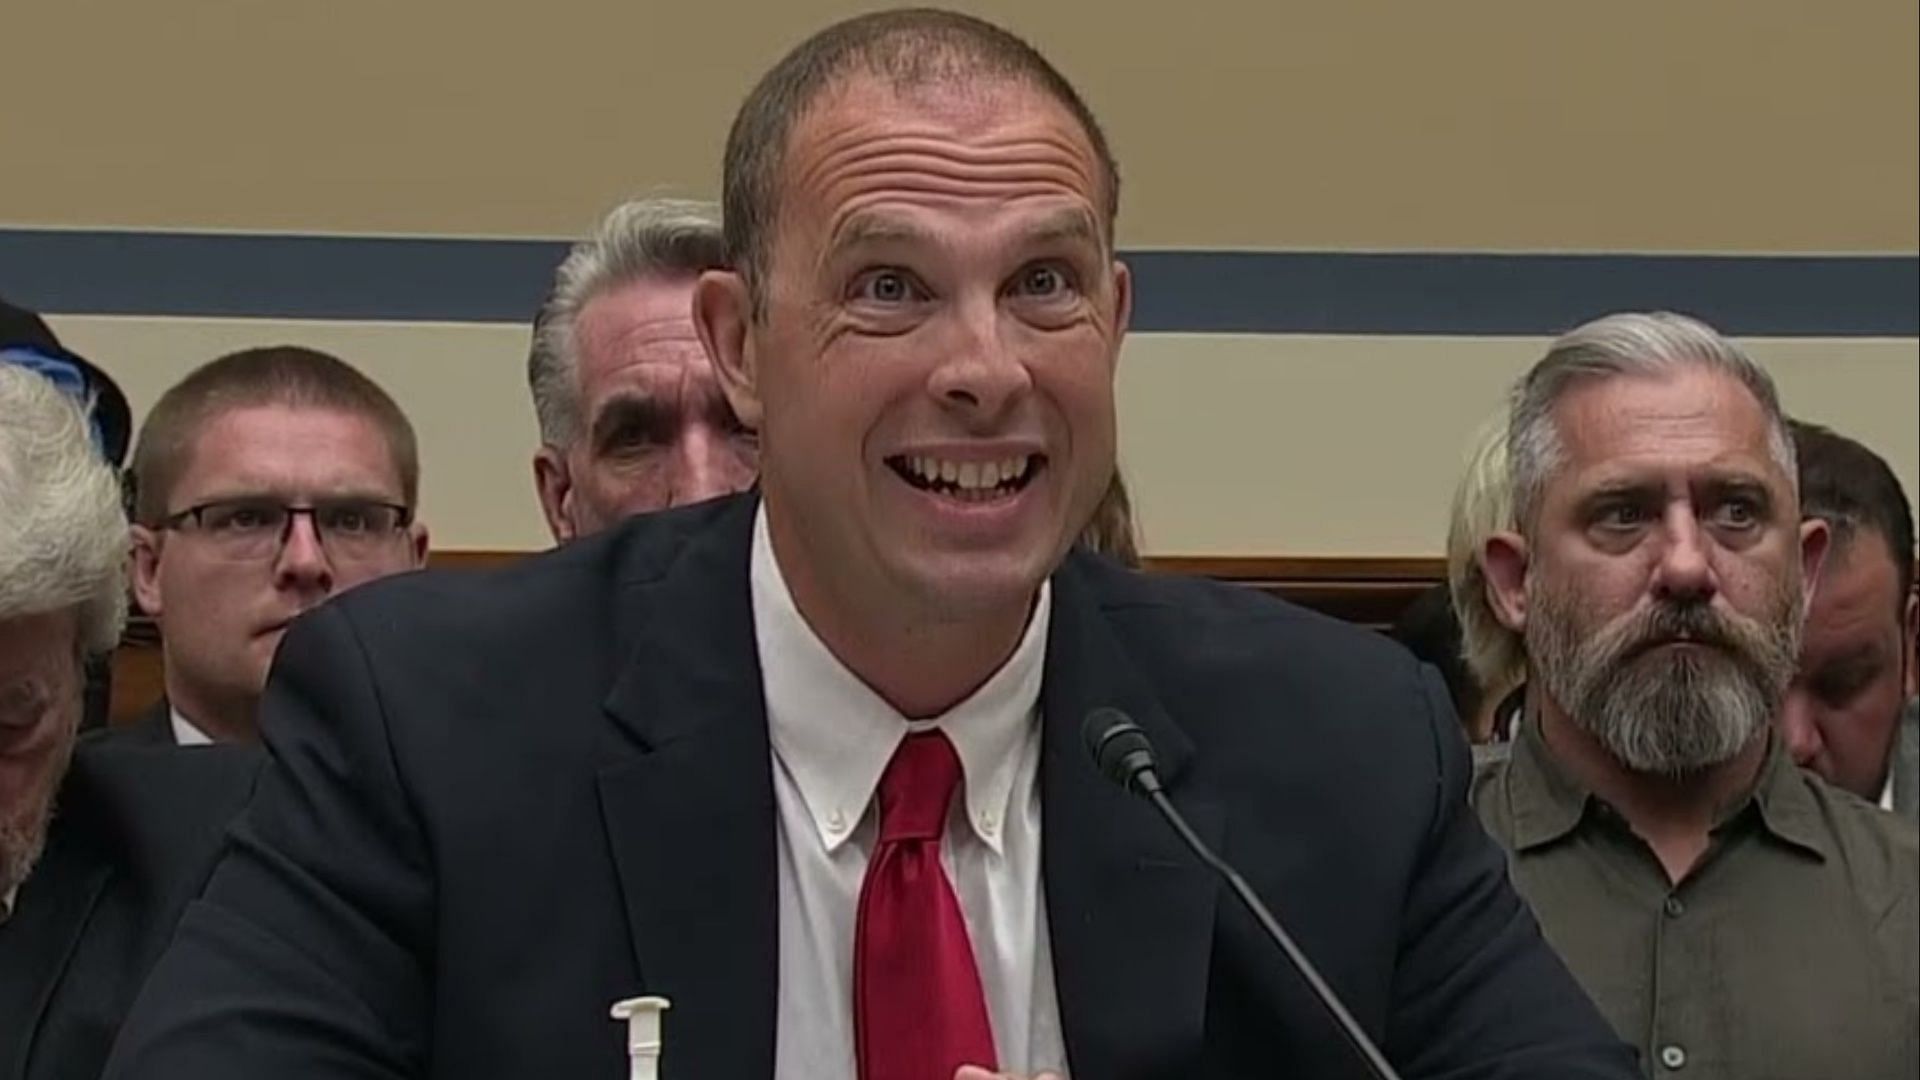 David Grusch is a former intelligence official of the US government. (Image via YouTube/C-SPAN)